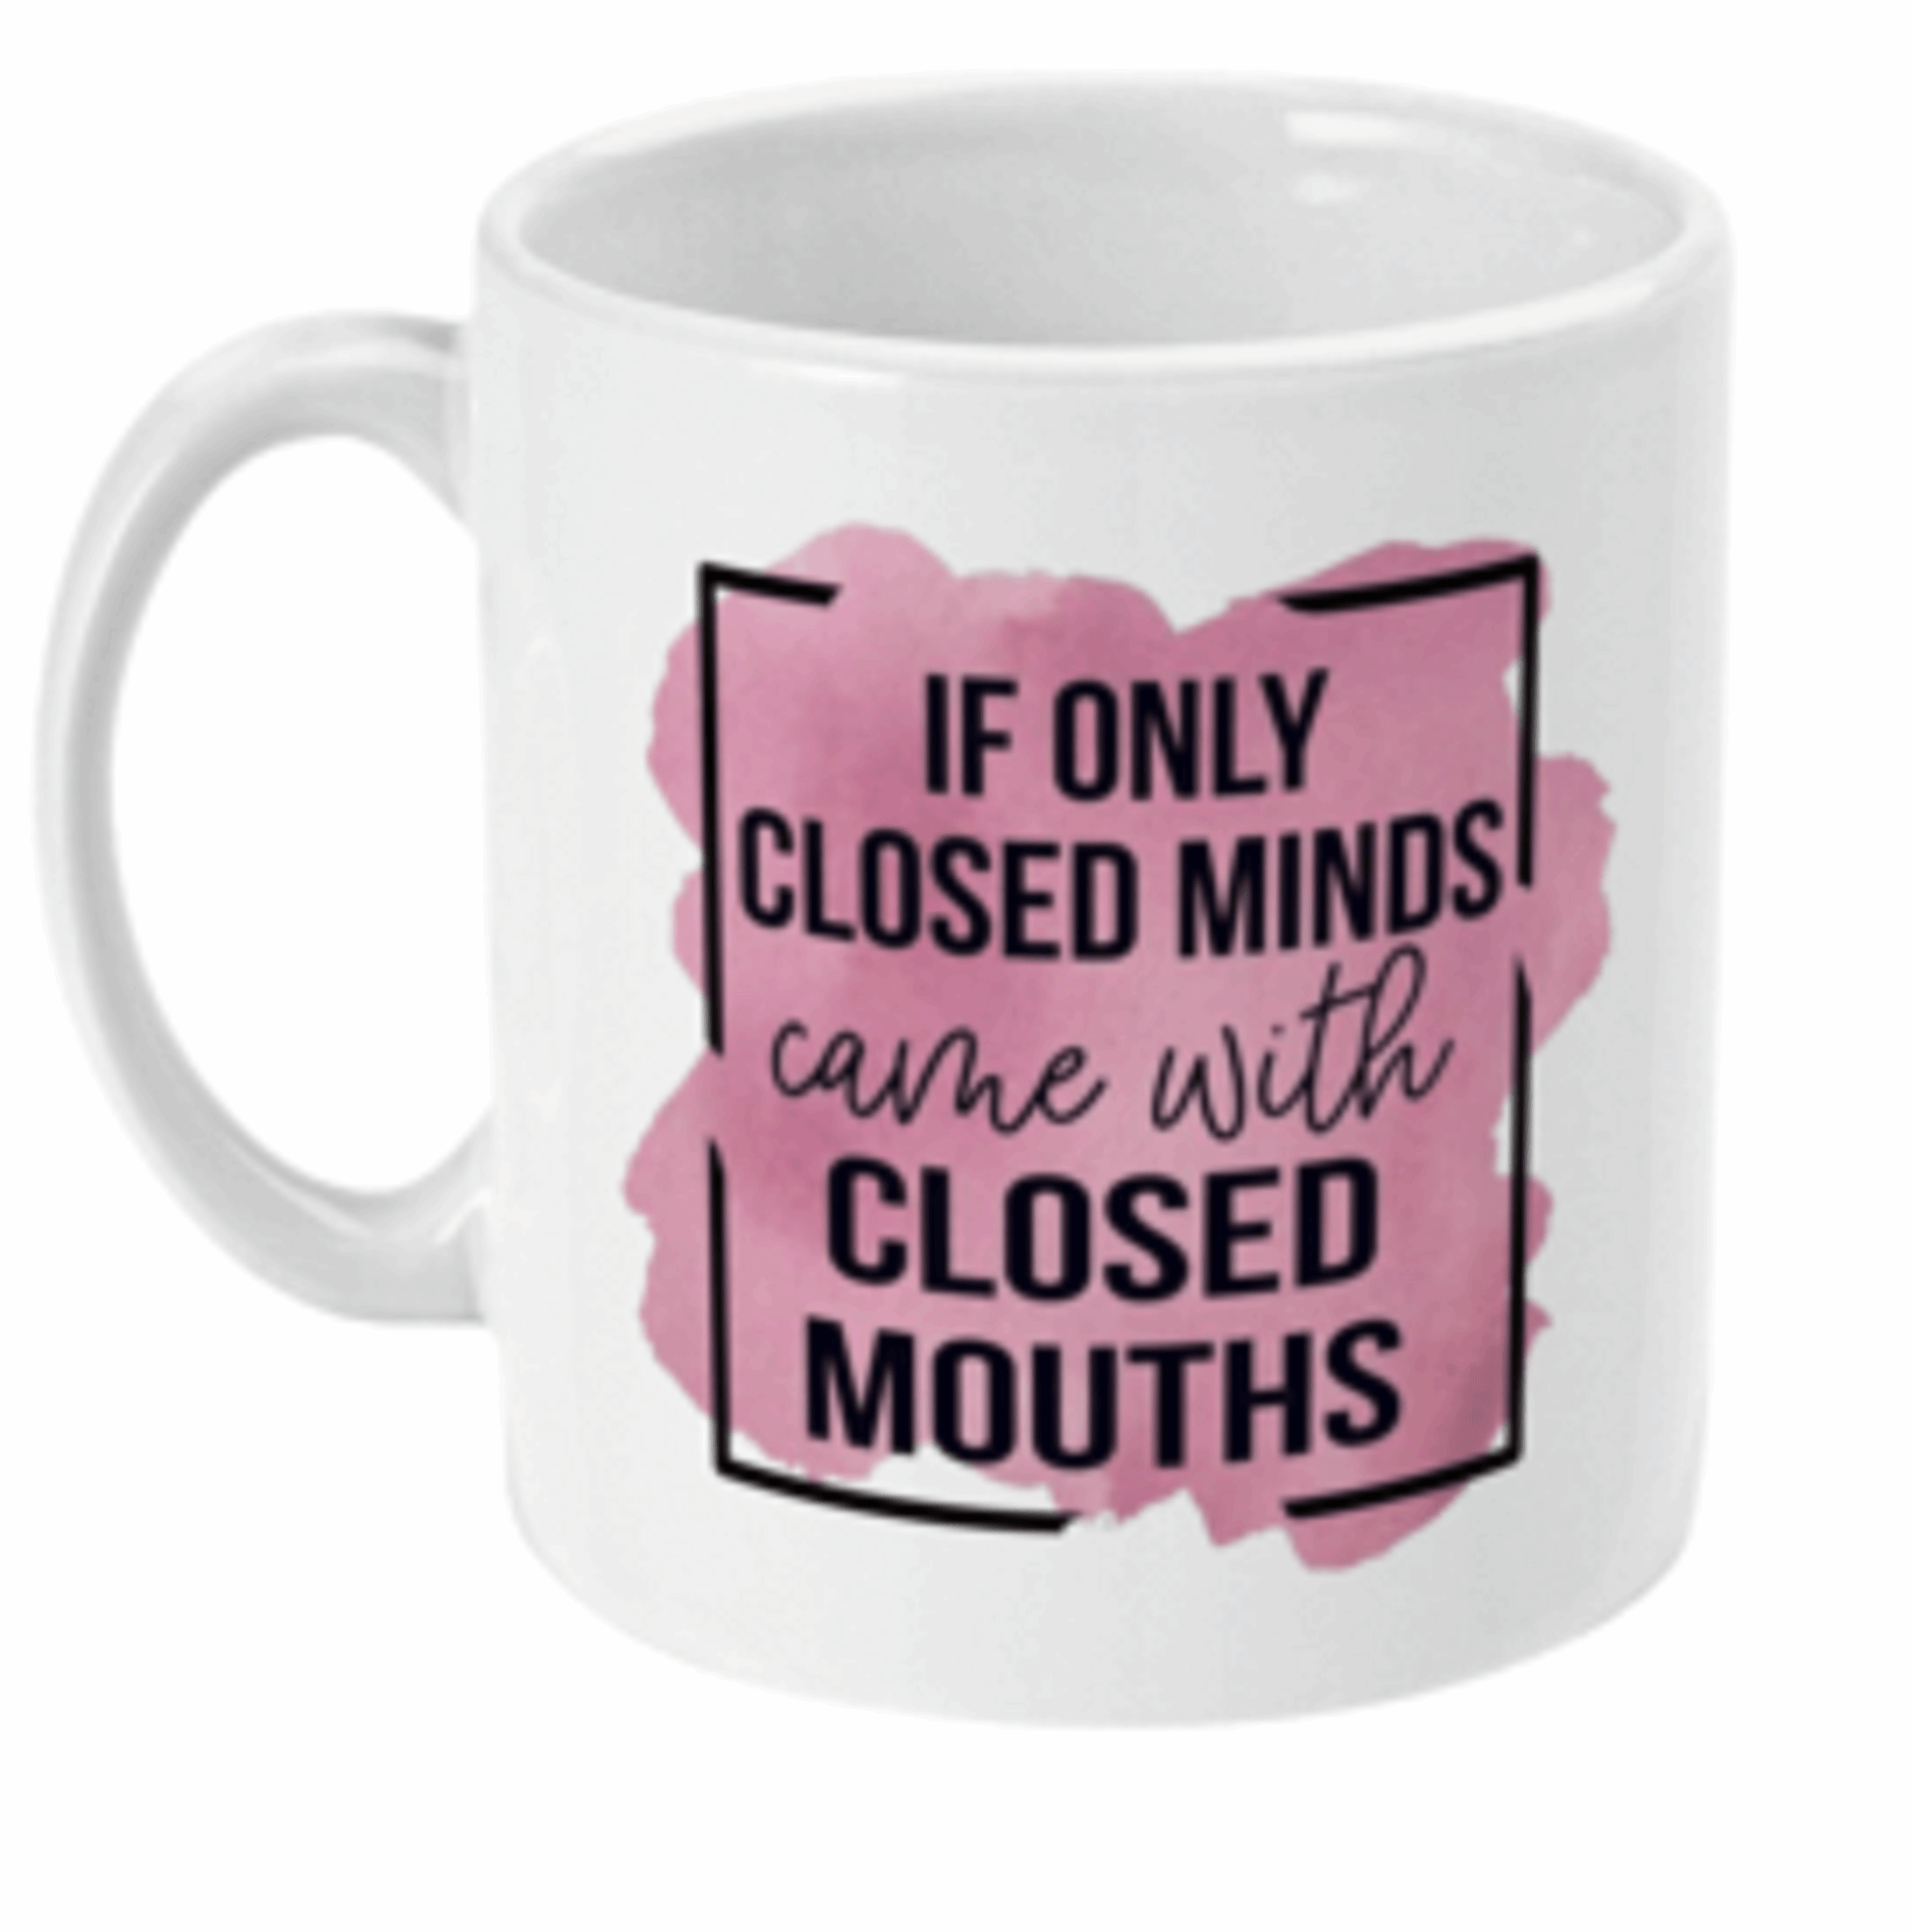  Closed Minds Closed Mouth Funny Mug by Free Spirit Accessories sold by Free Spirit Accessories